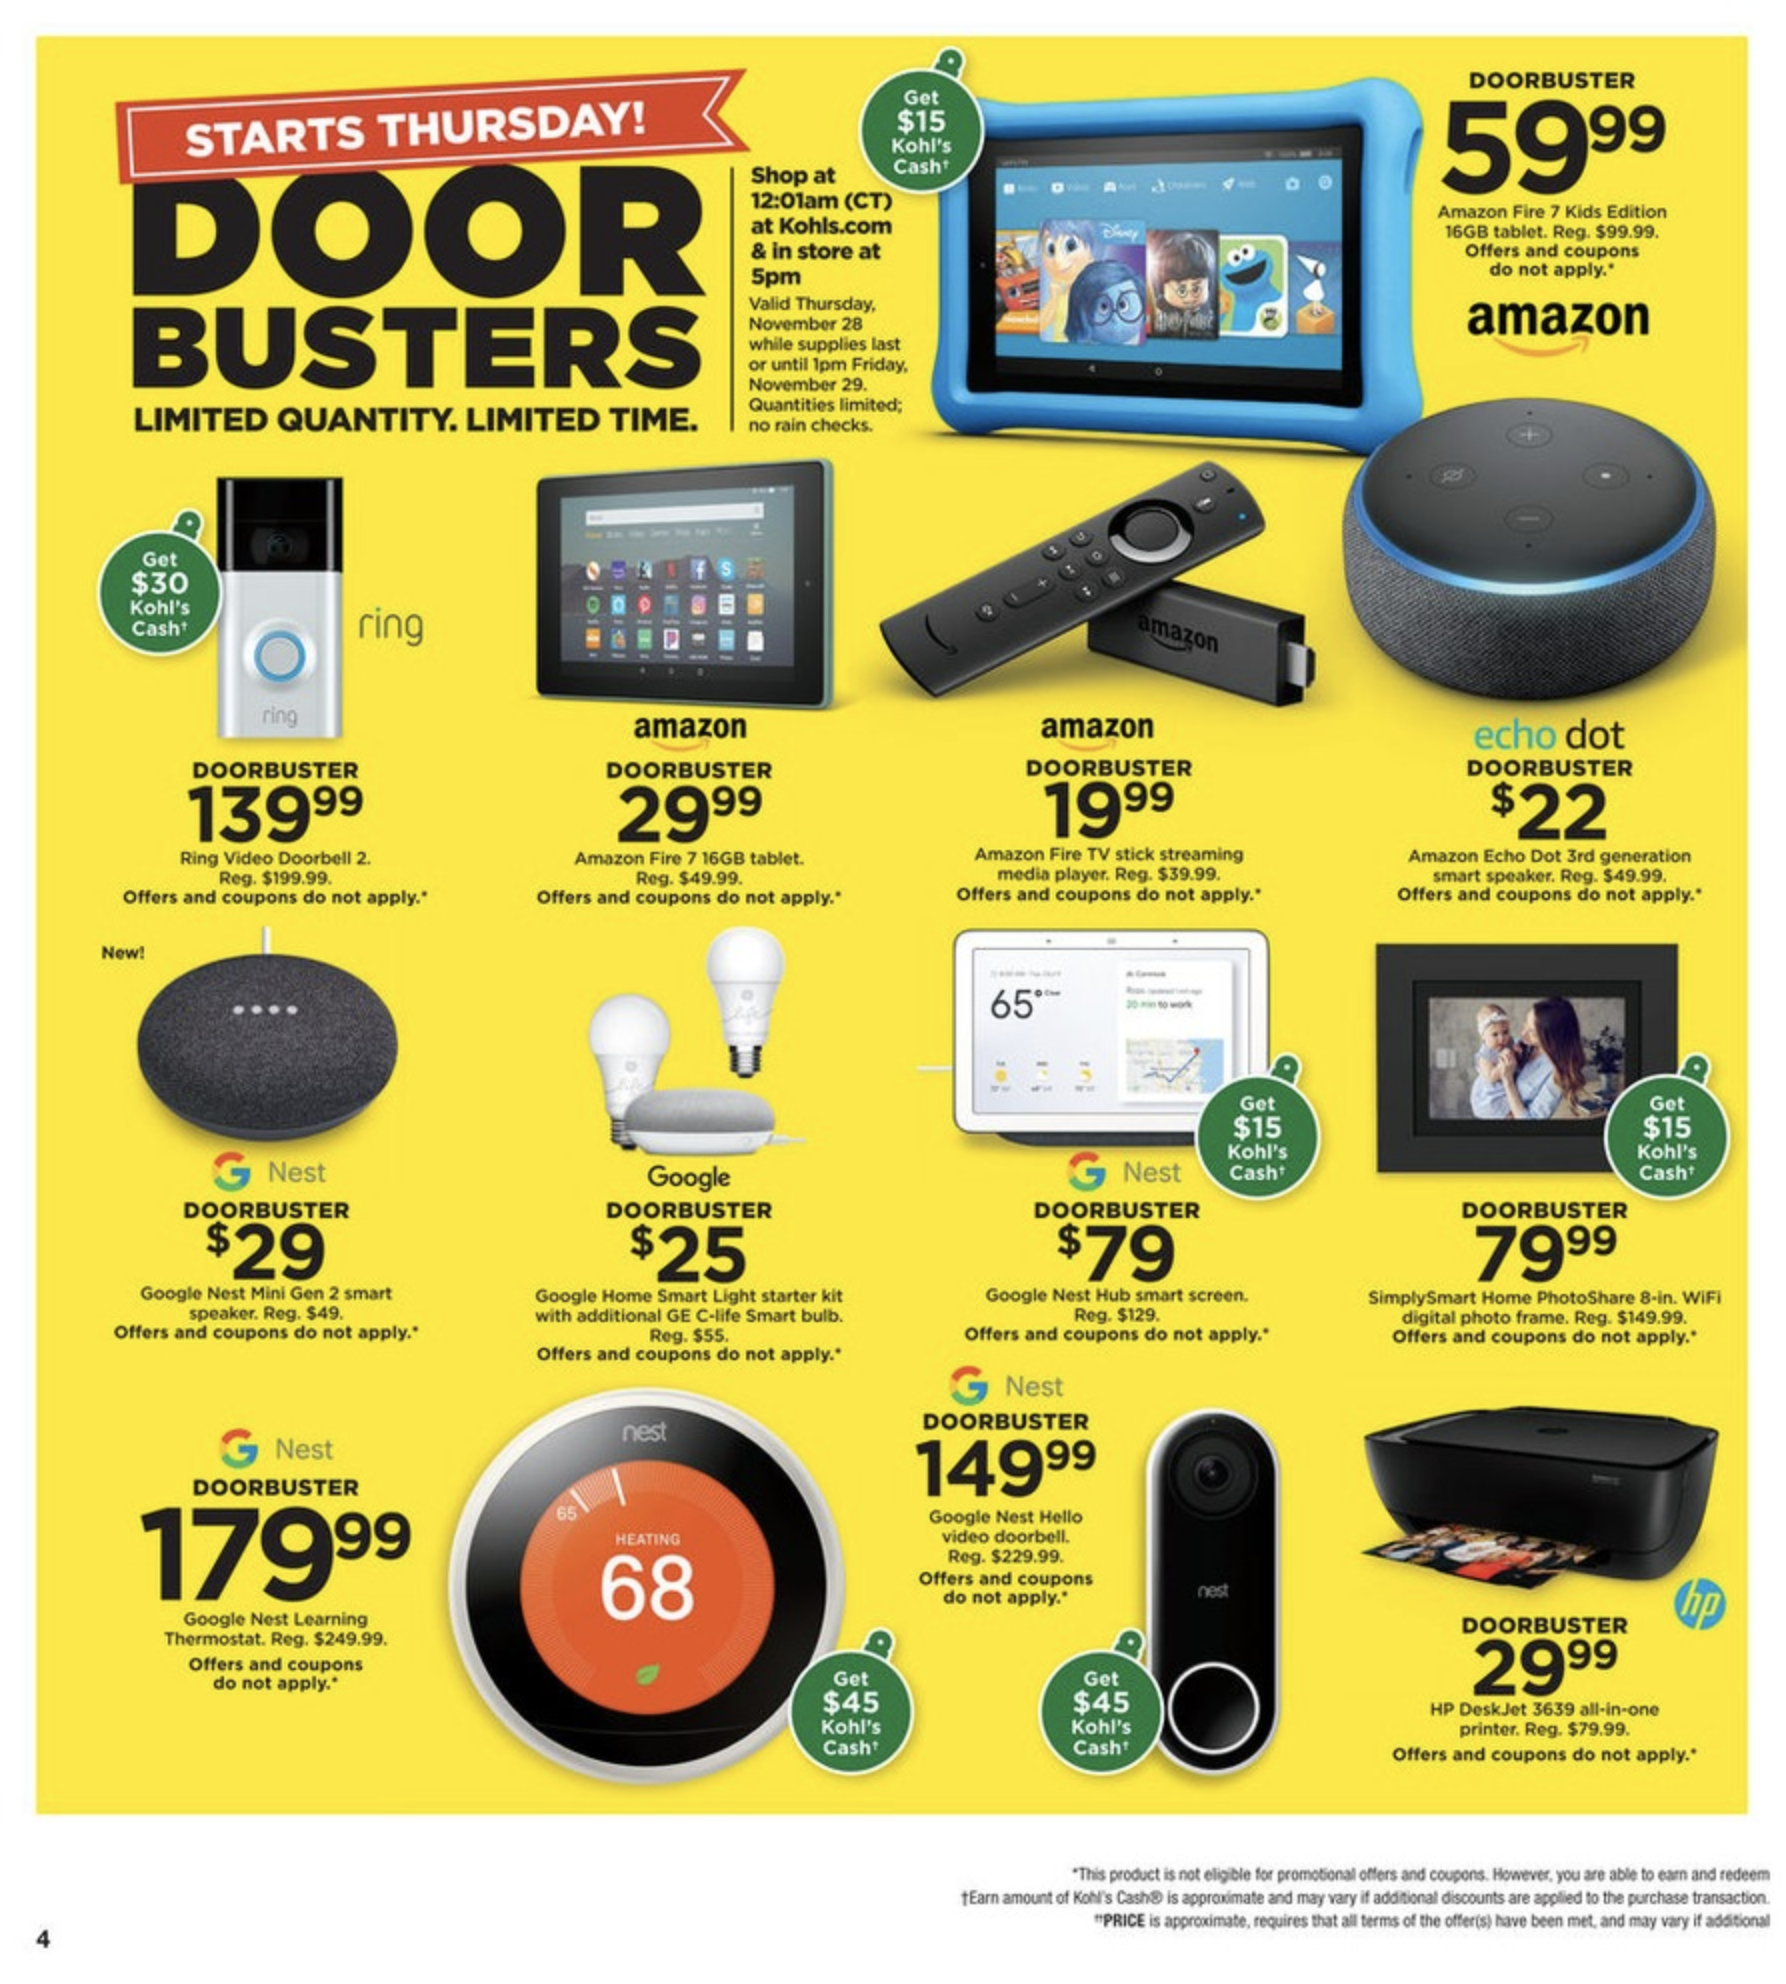 Kohl's Black Friday Ad Is Packed With Deals on Electronics